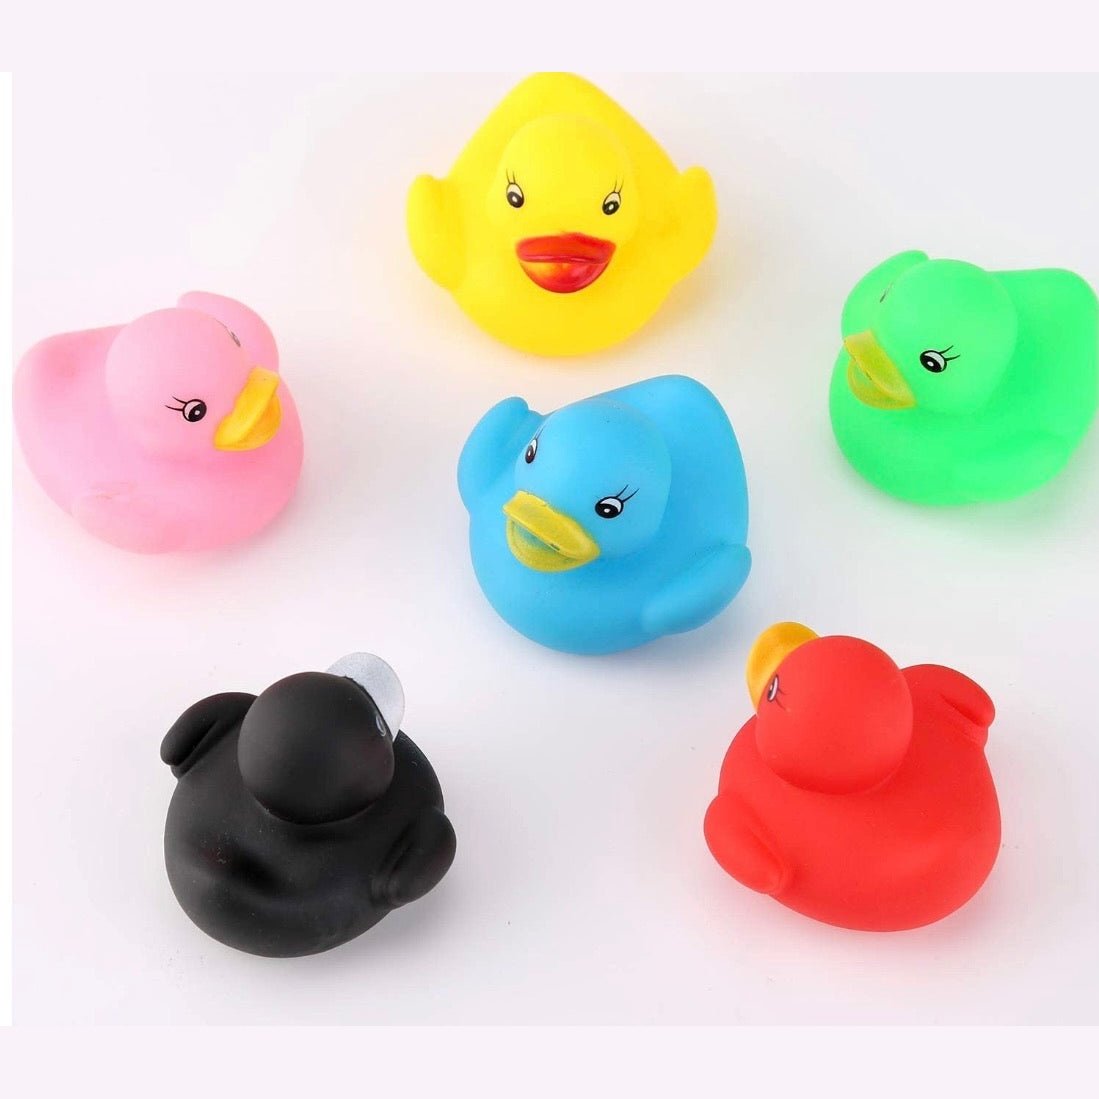 Rubber Duckies – Breaking the Mold YYC